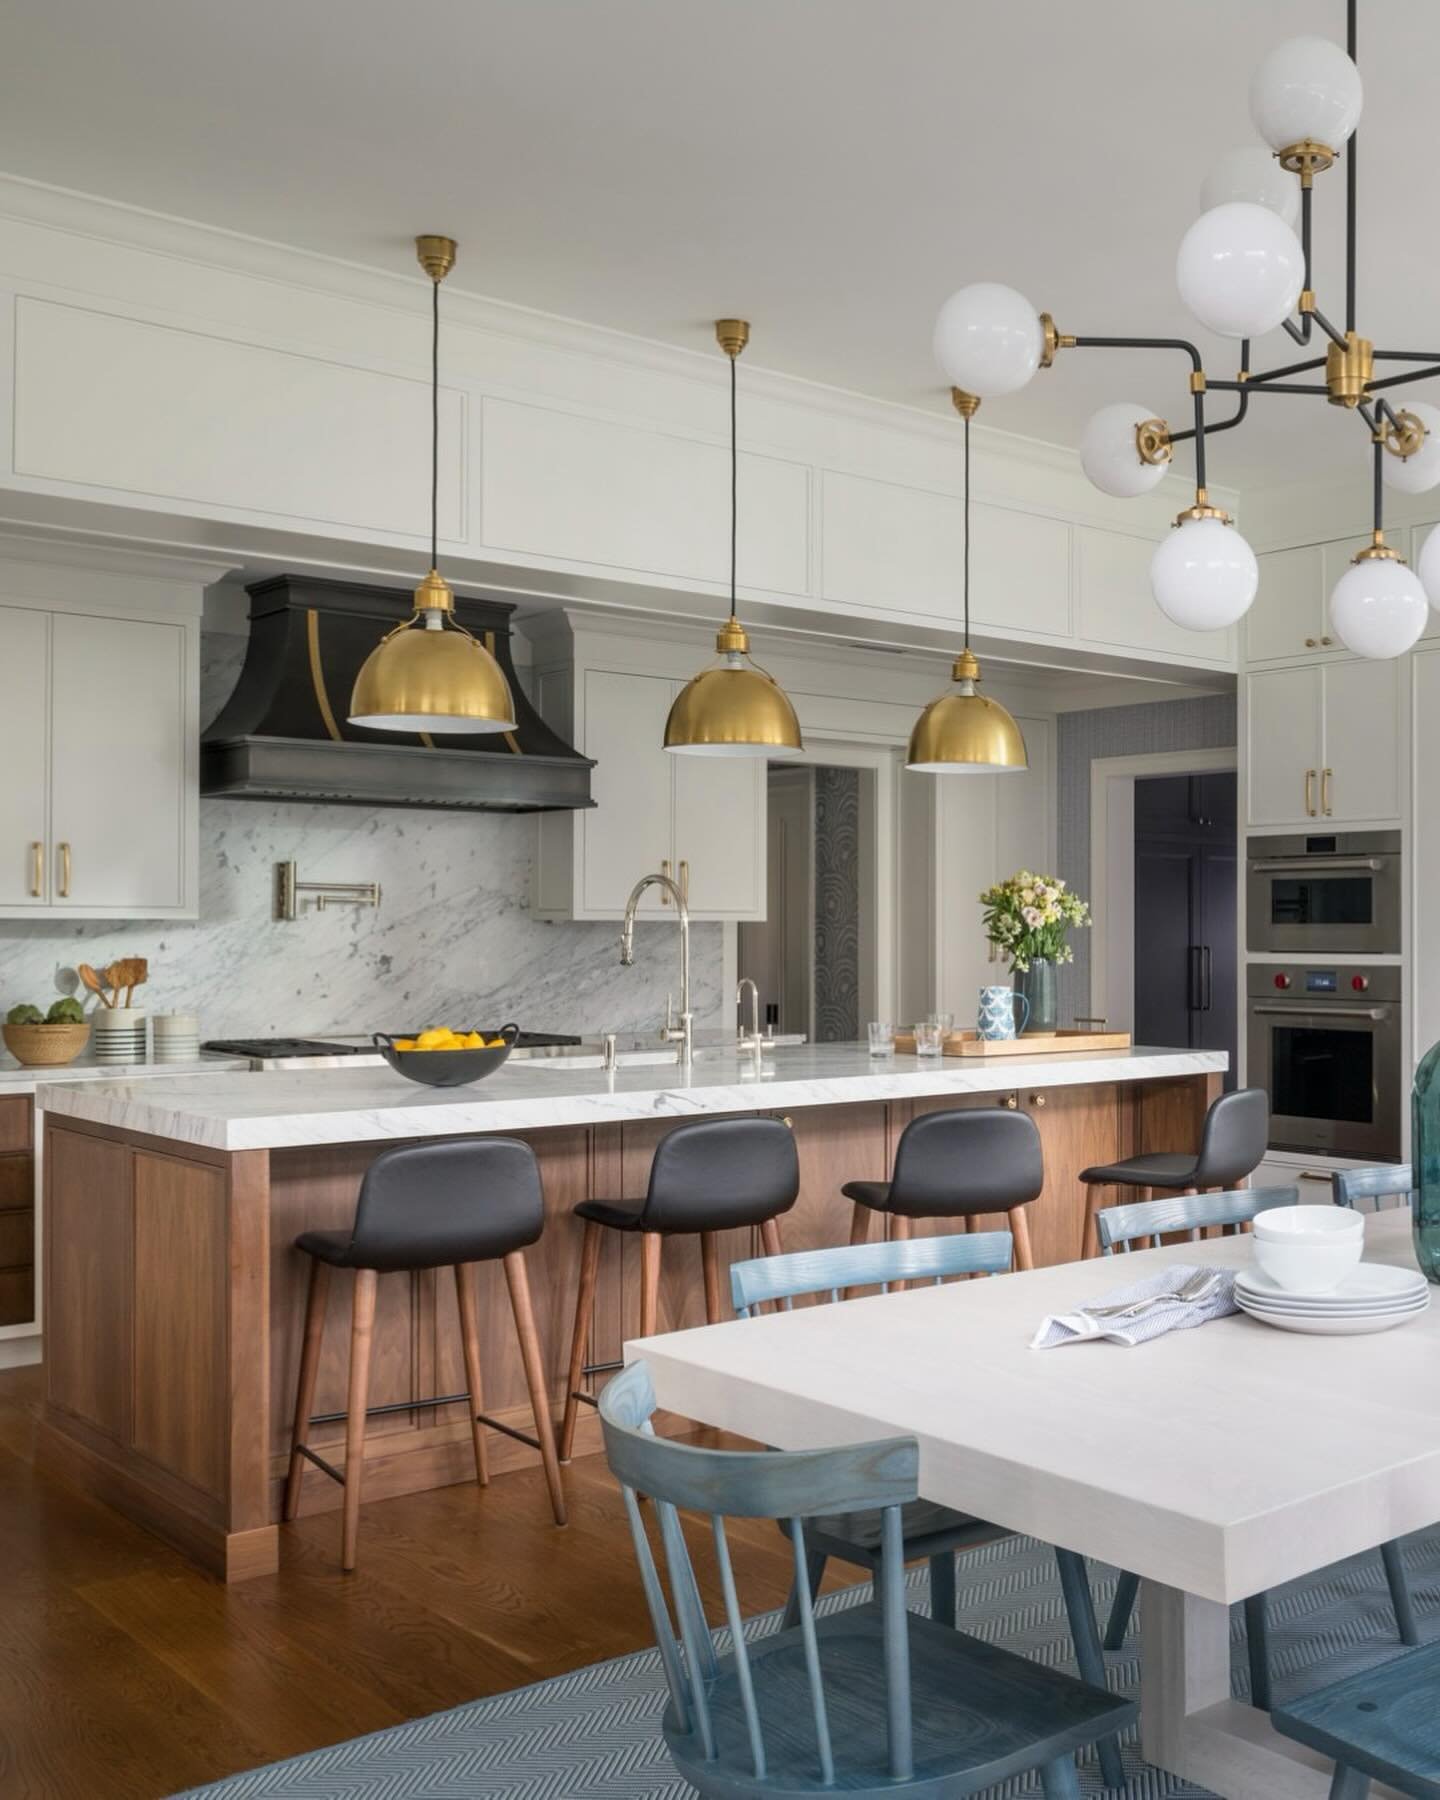 Keeping it classic, clean and sophisticated, this kitchen expansion is packed with design details. Seamless Carrara Marble slabs on both the backsplash and center island, custom range hood, walnut center island, two-tone cabinetry flanking the range 